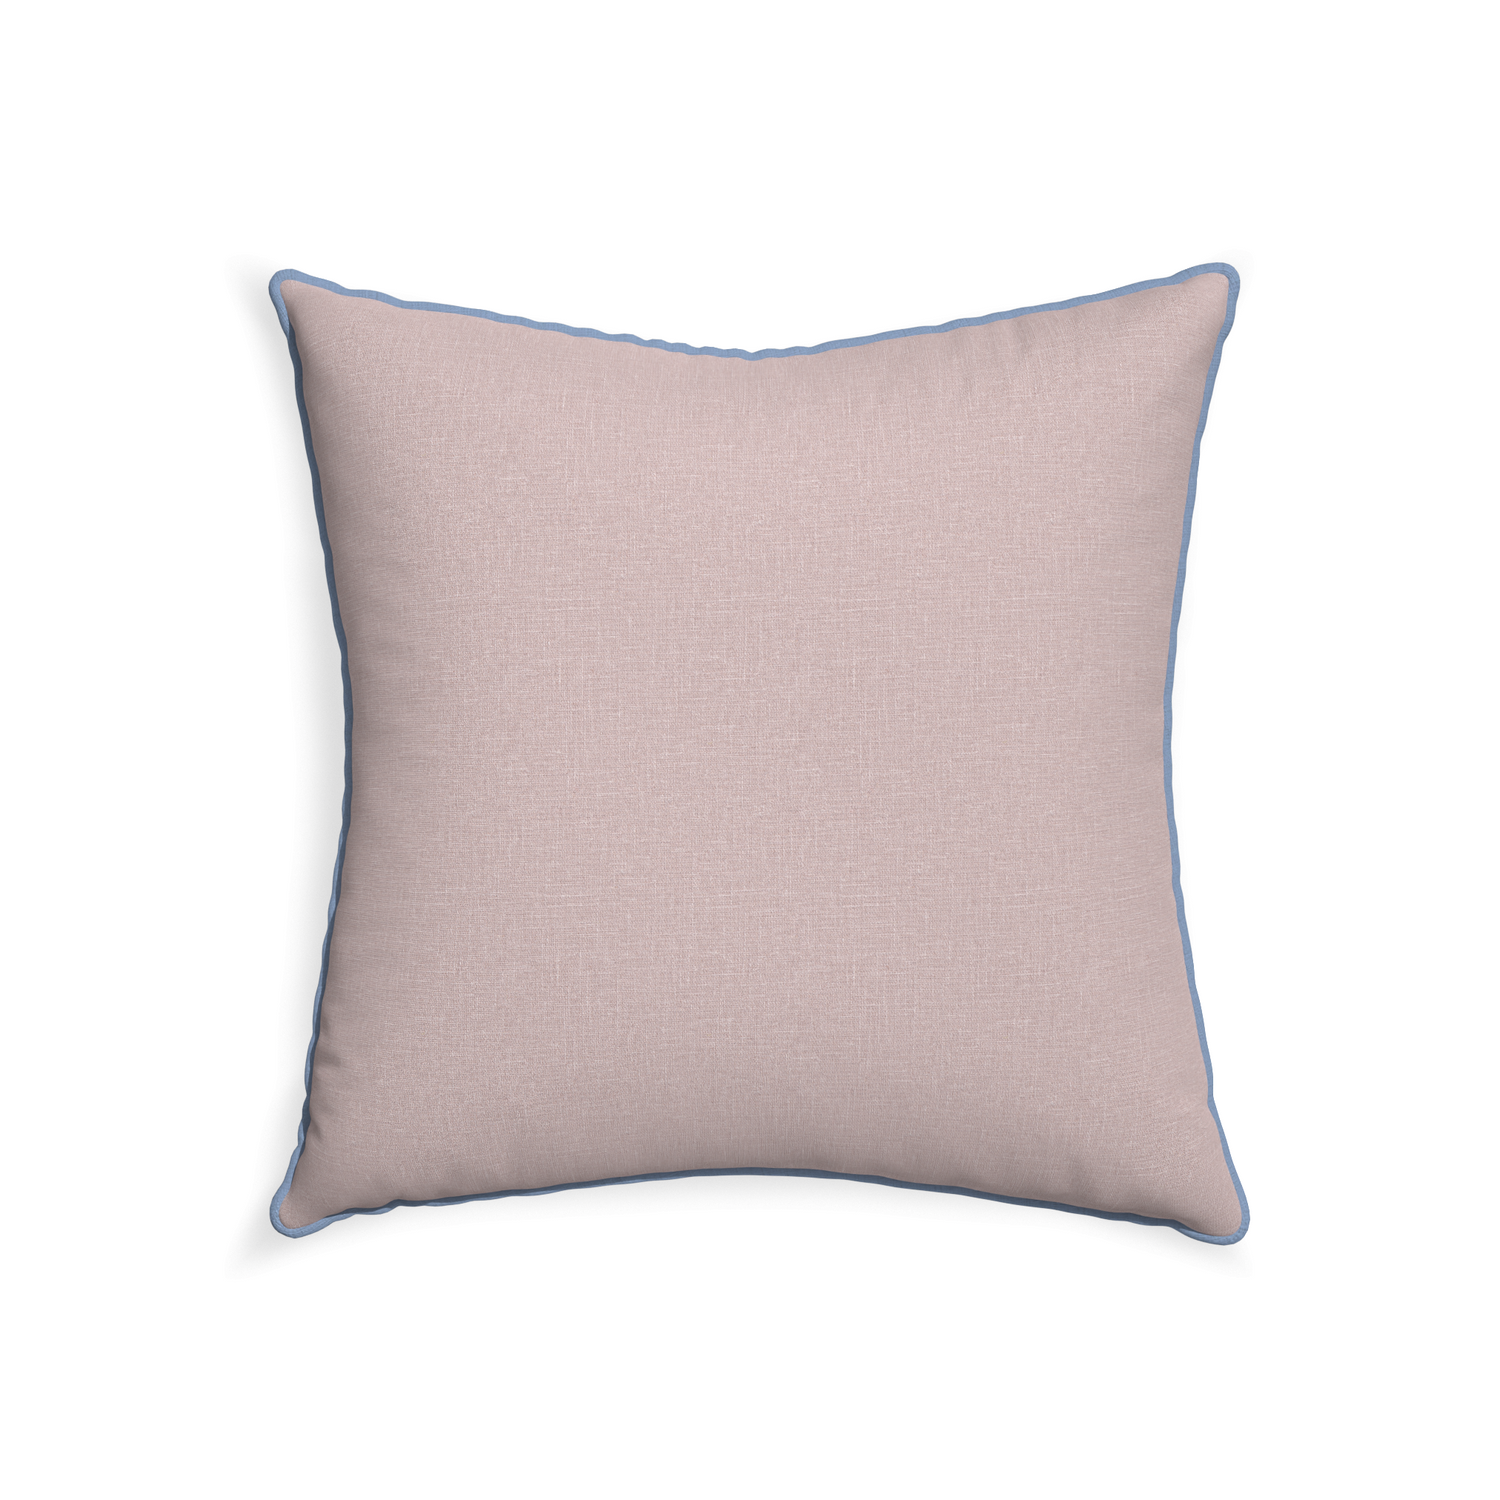 22-square orchid custom mauve pinkpillow with sky piping on white background